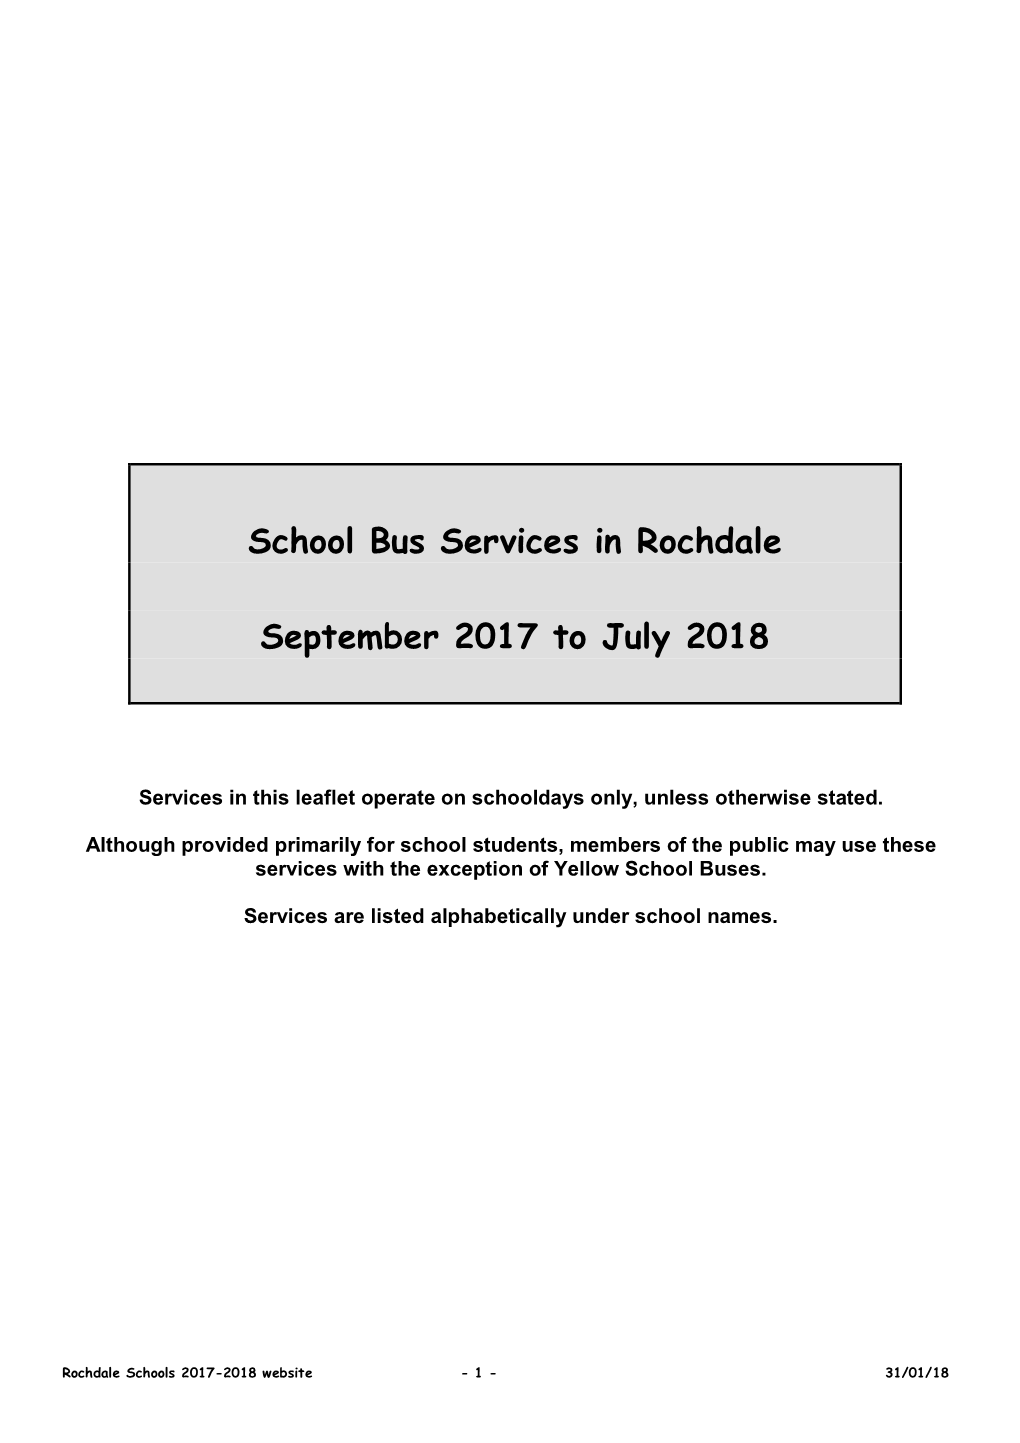 School Bus Services in Rochdale September 2017 to July 2018